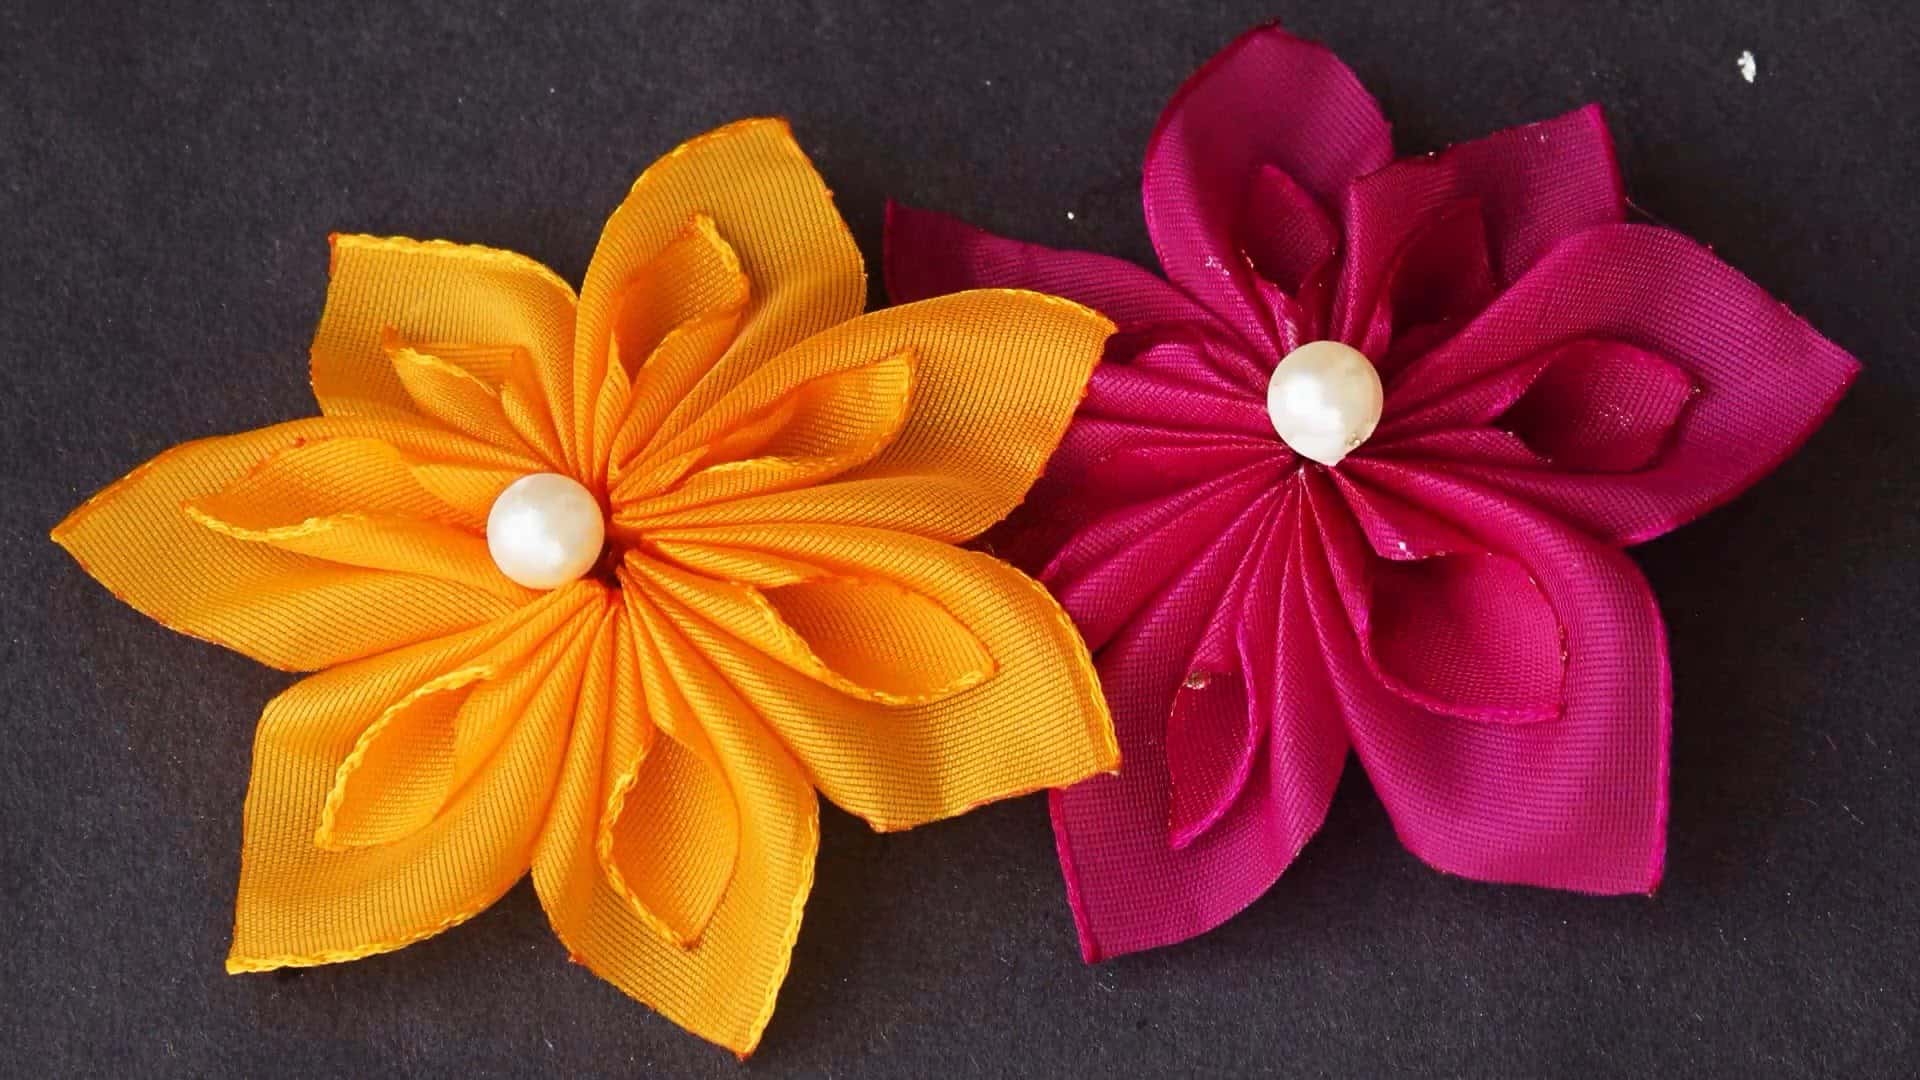 4 Ways You Can Use a Satin Ribbon for Different Art & Craft Ideas and